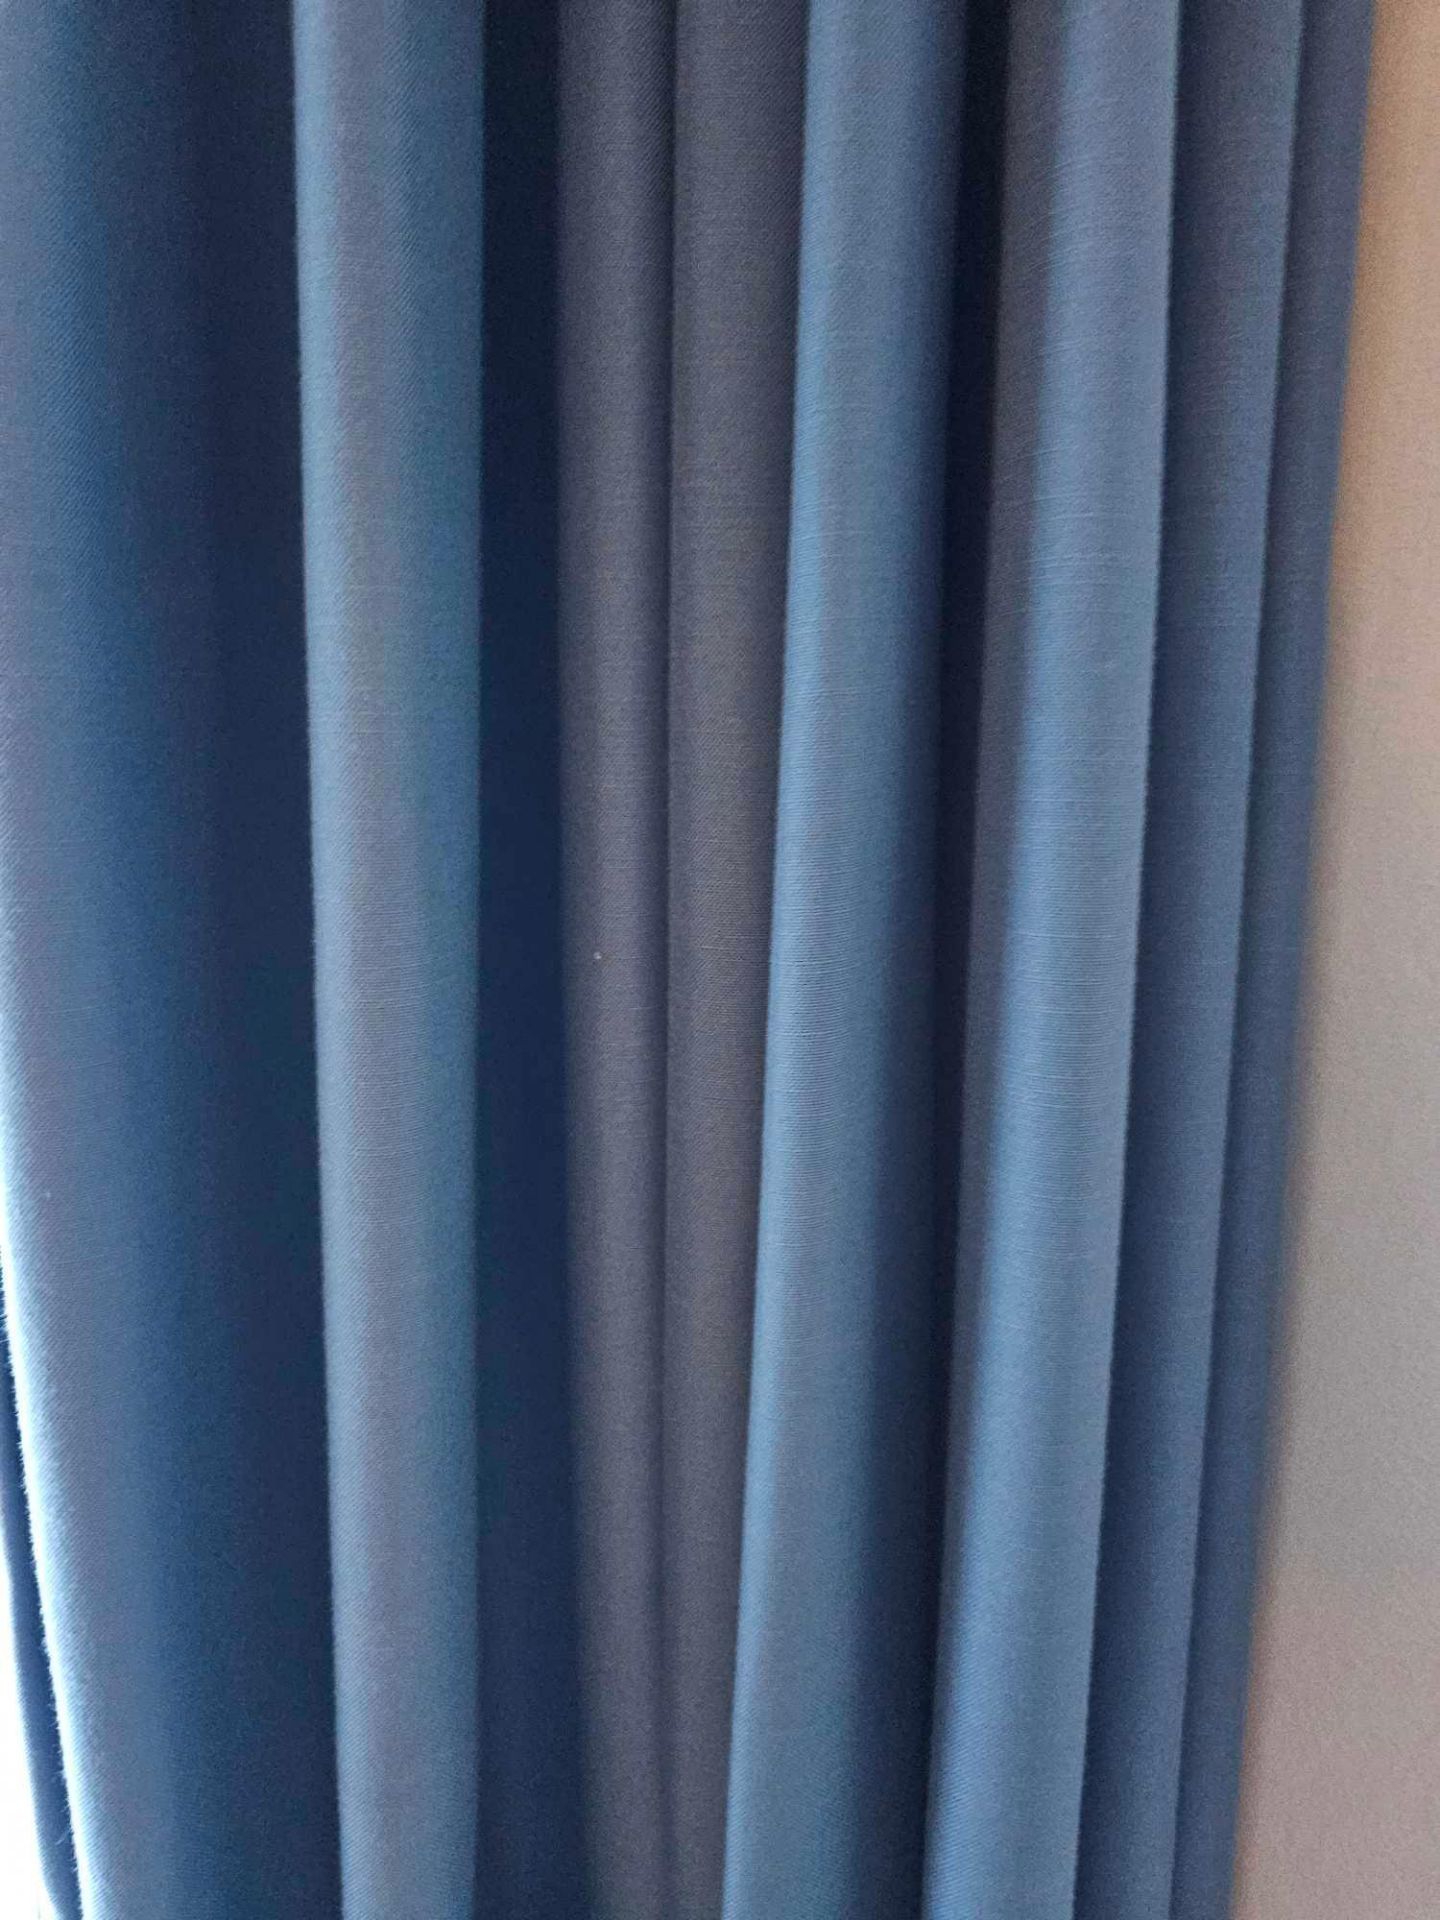 2 x Pair Of Drapes Blue Wove Linen Fully Lined With Pencil Pleat Top 200 x 260cm (Loc: Room 132) - Image 2 of 3